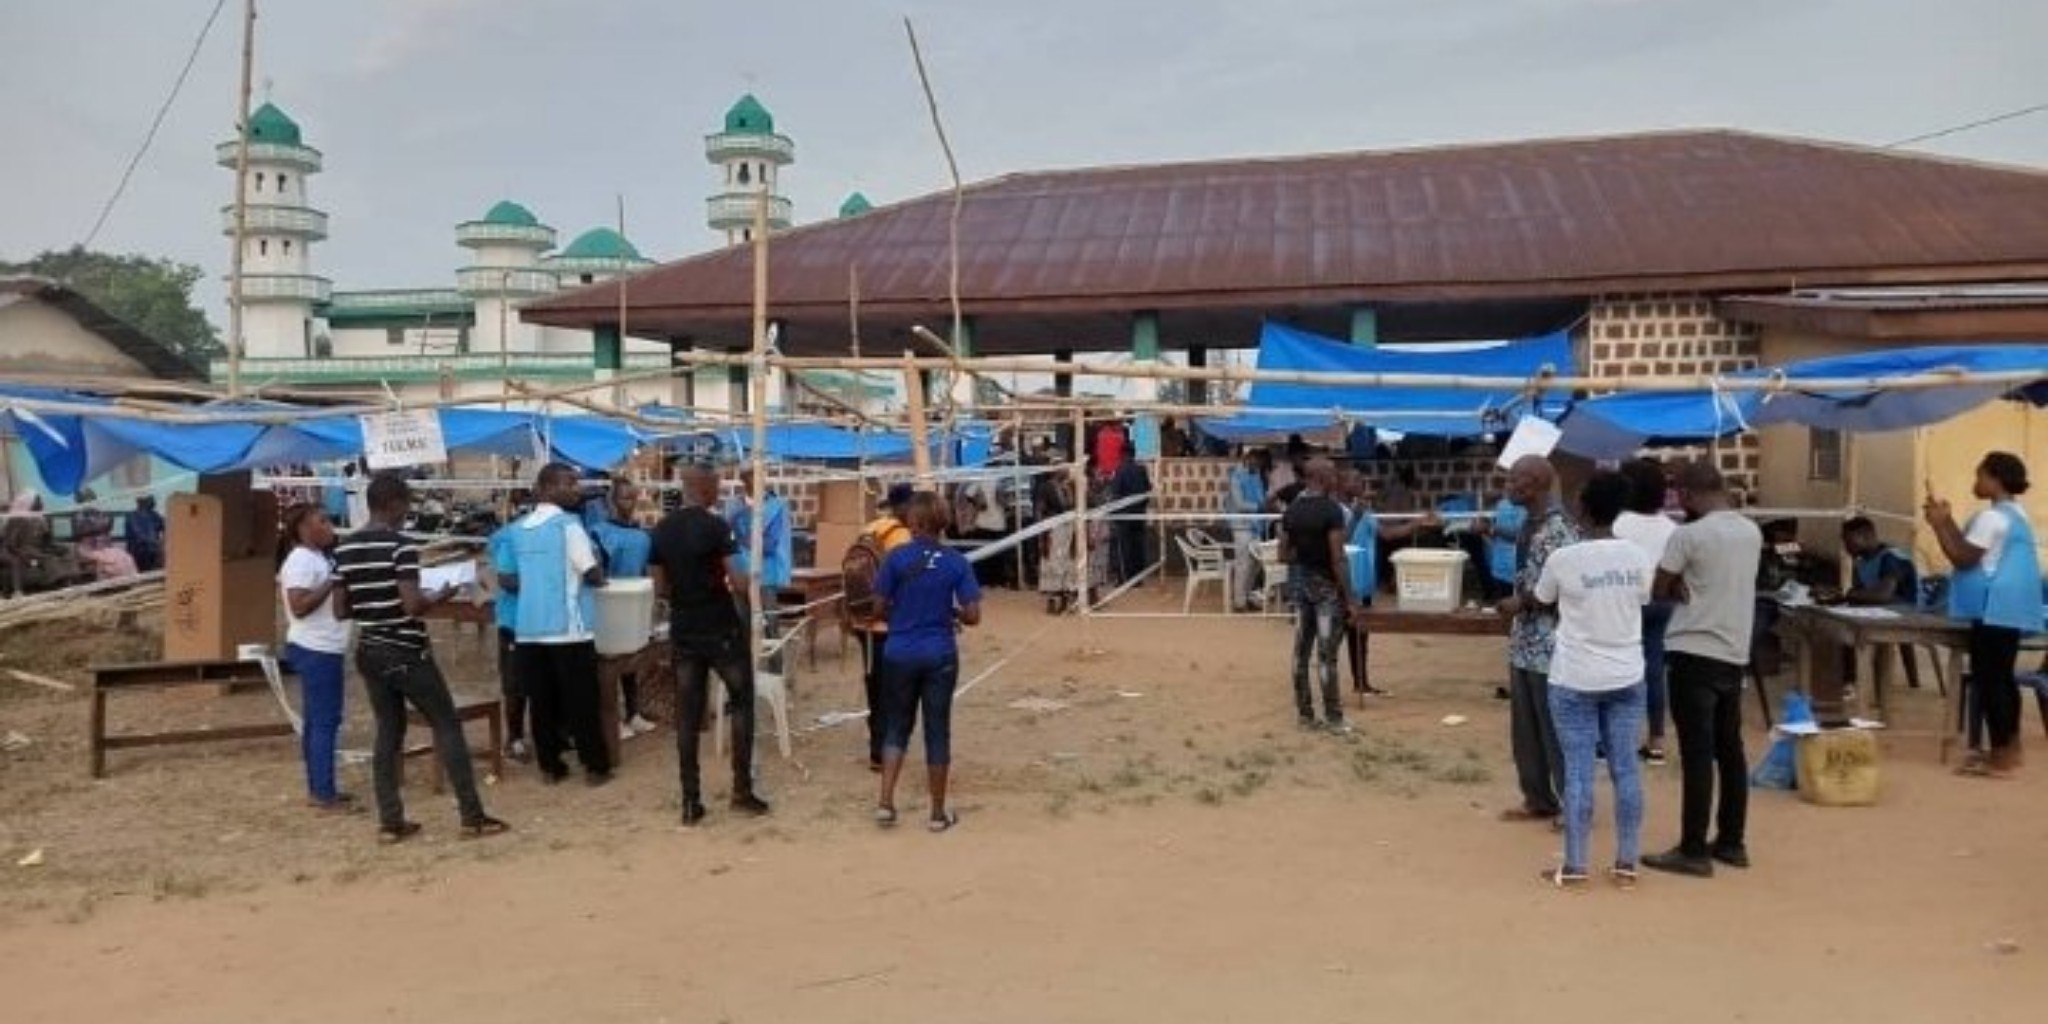 NEC Deploys Personnel Believed to Have SLPP Connections to Opposition Strongholds Ahead of Crucial 2023 Elections